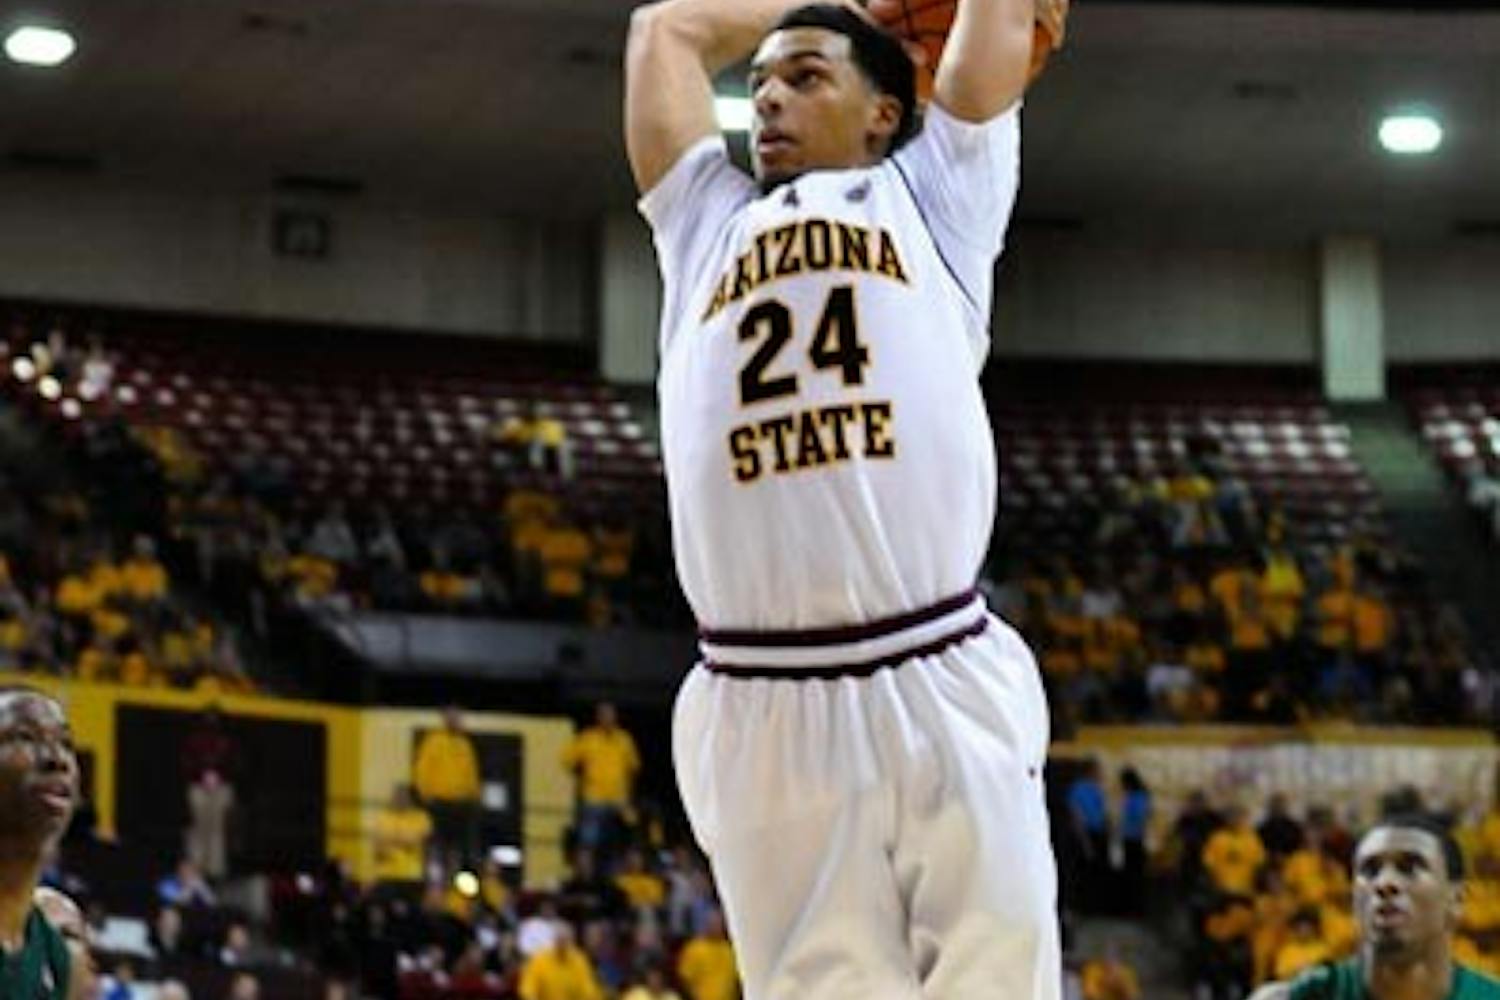 LEADING MAN: Sophomore guard Trent Lockett goes up for a dunk during last weekend's game against UAB. Lockett led ASU to two wins over the weekend in the Great Alaksa Shootout, scoring 24 points against Weber State and 18 against Houston Baptist. The Sun Devils fell Saturday to St. Johns in the tournament championship game with senior guard Ty Abbott leading the way with 22 points.